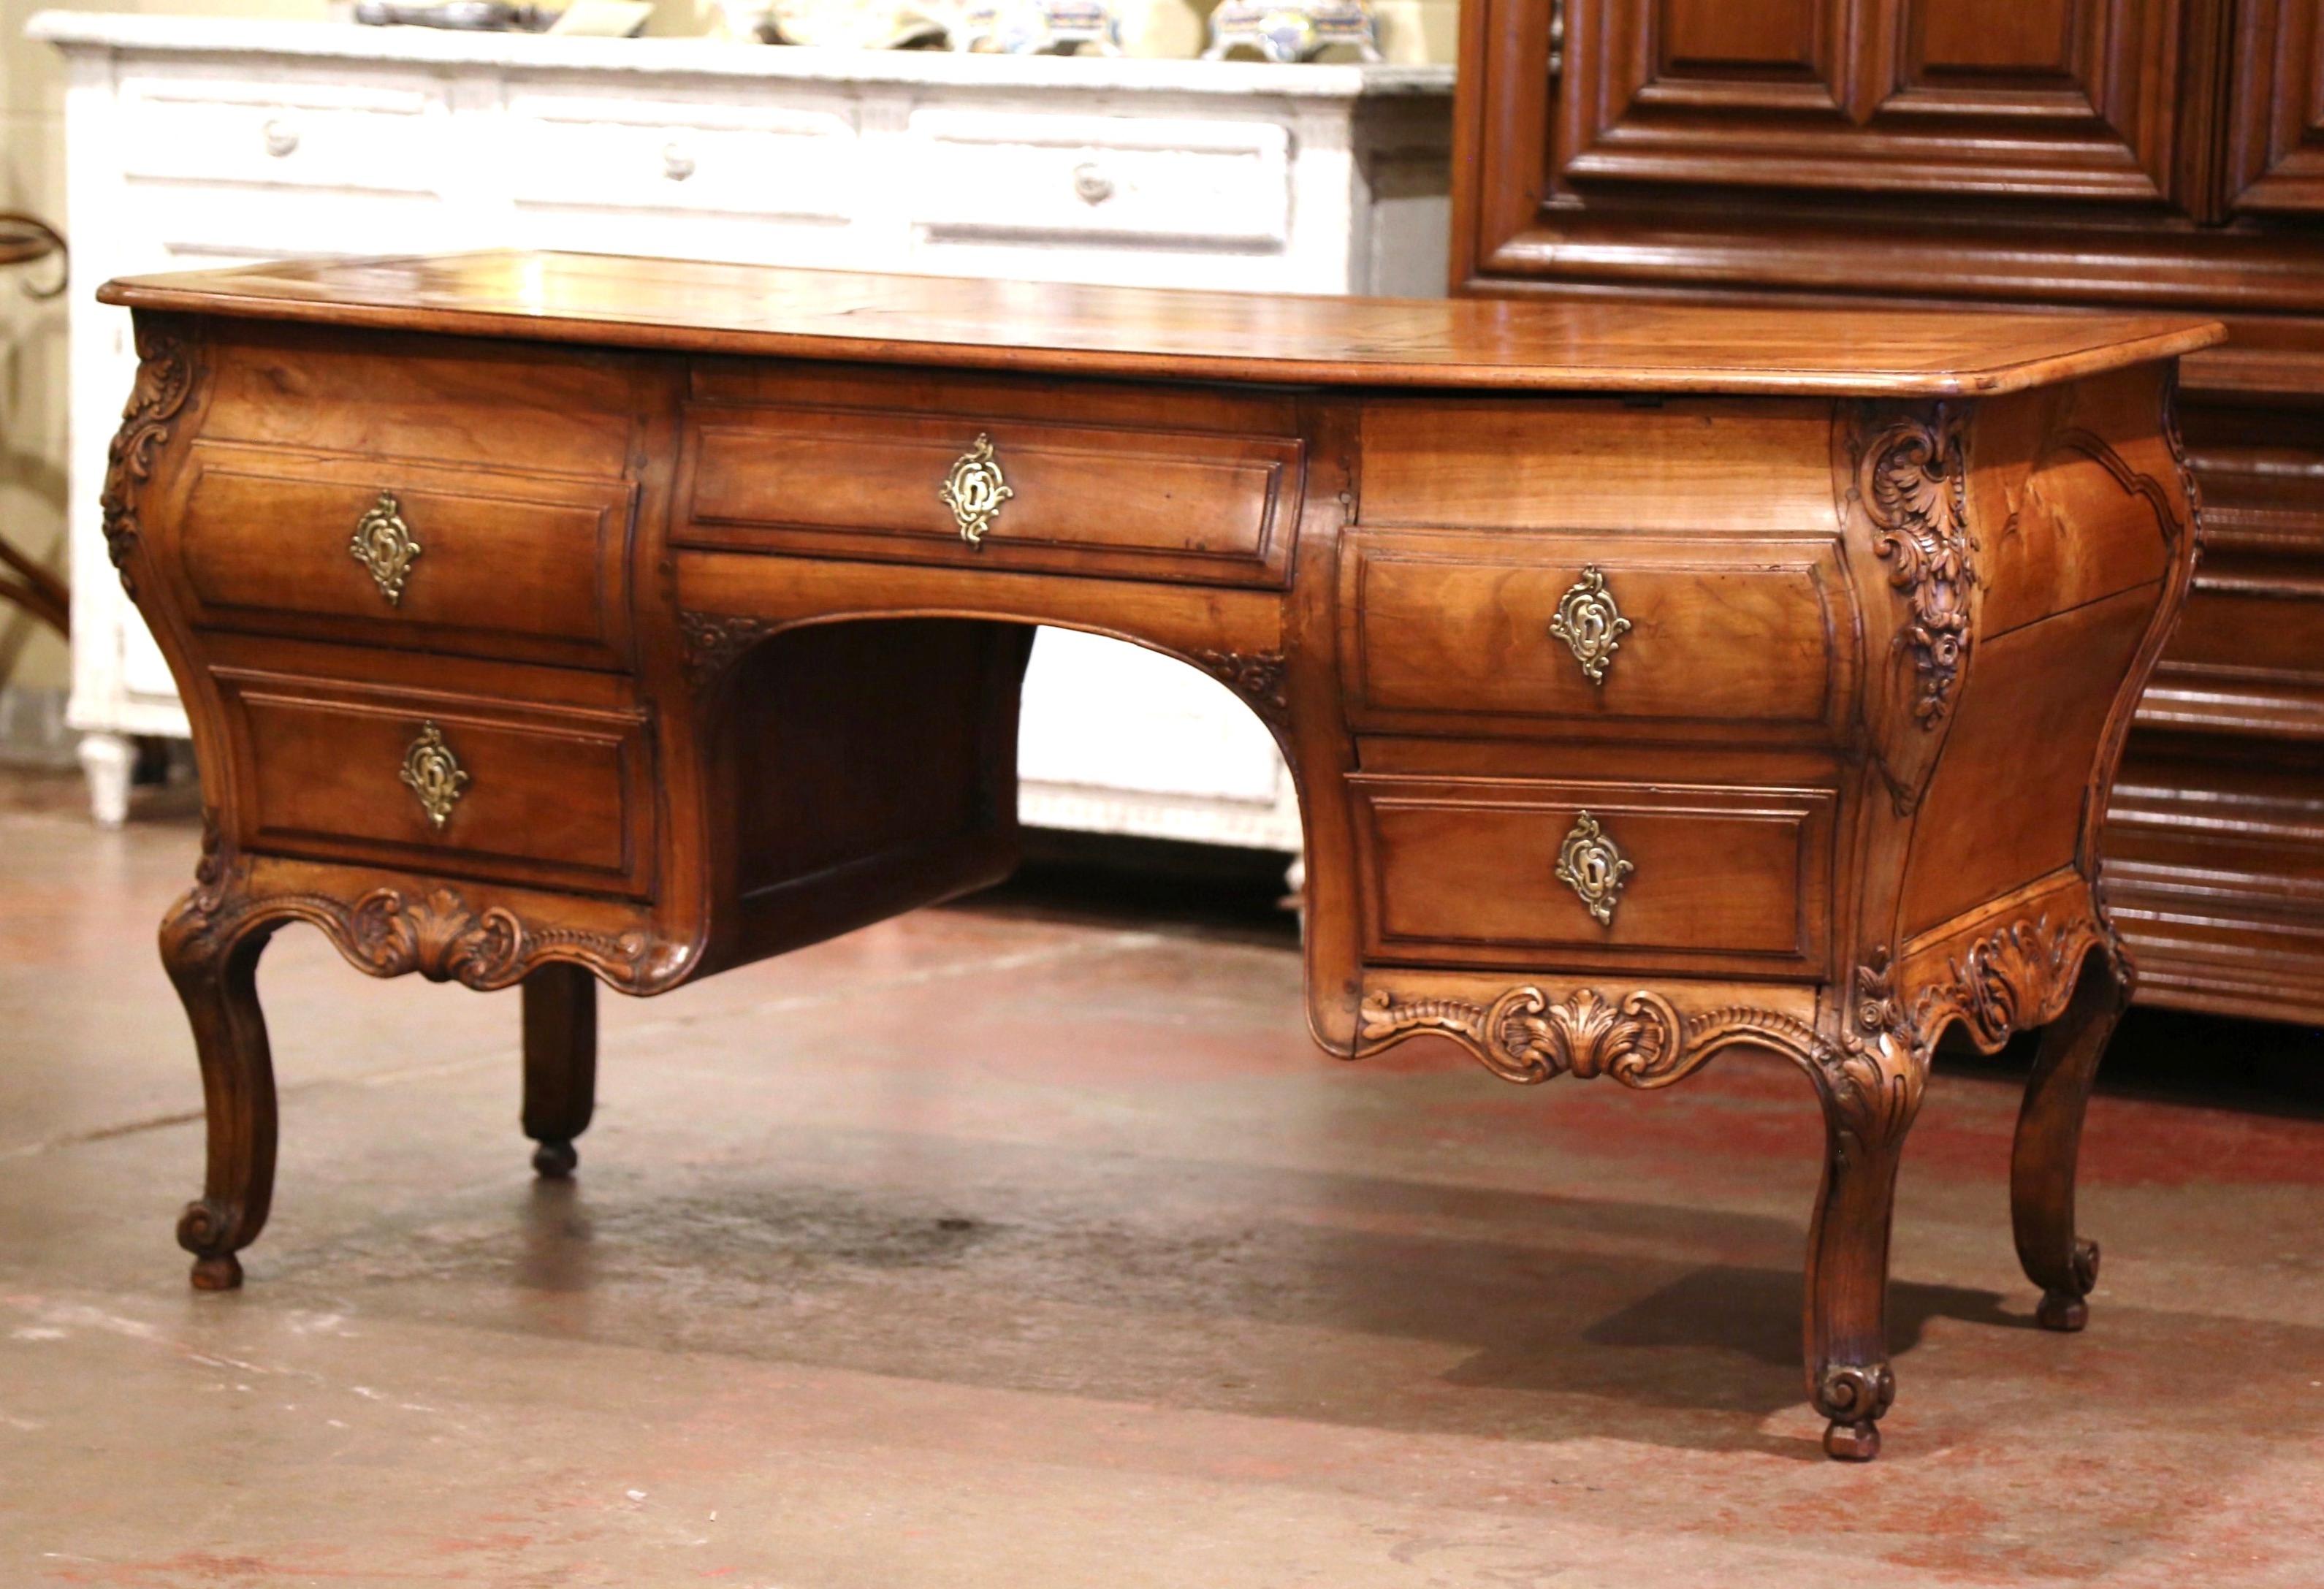 18th Century French Louis XV Carved Serpentine Cherry Desk with Parquetry Top For Sale 6